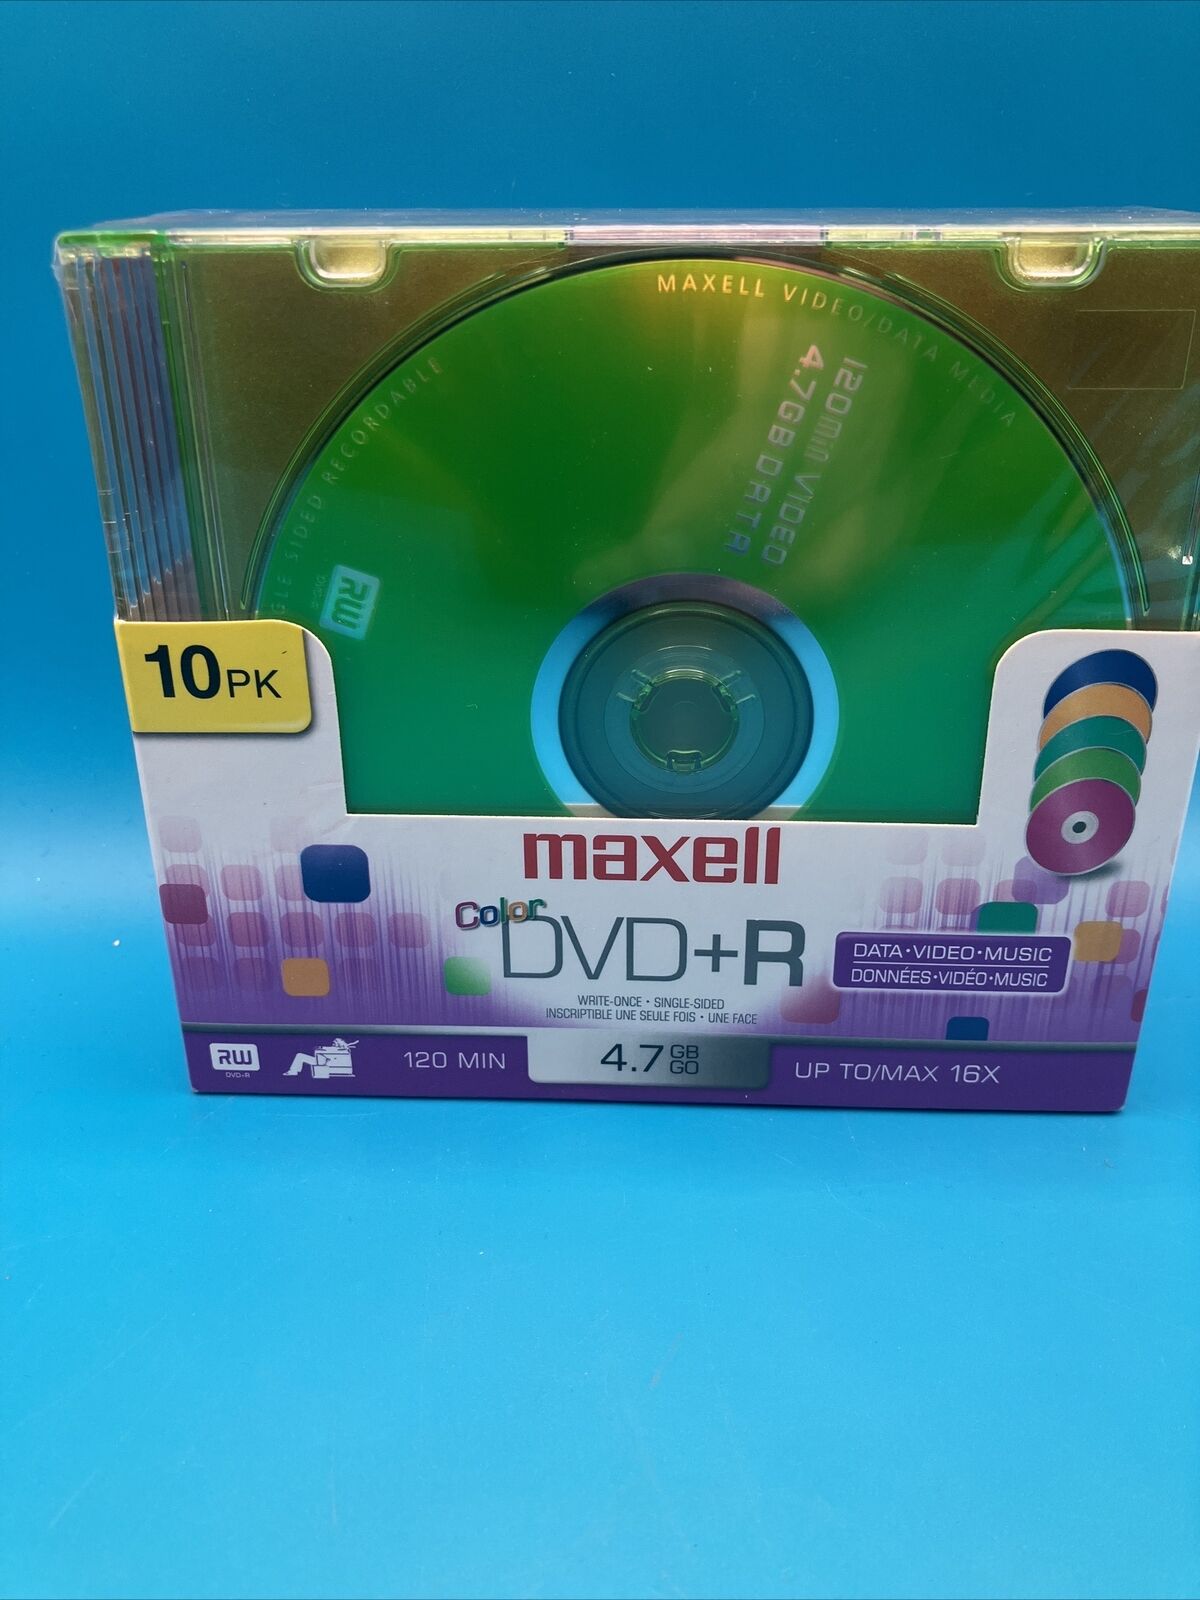 Maxell Color Dvd-R 10 Pack 4.7 Gb 120 Min Blank DVDR Media Discs